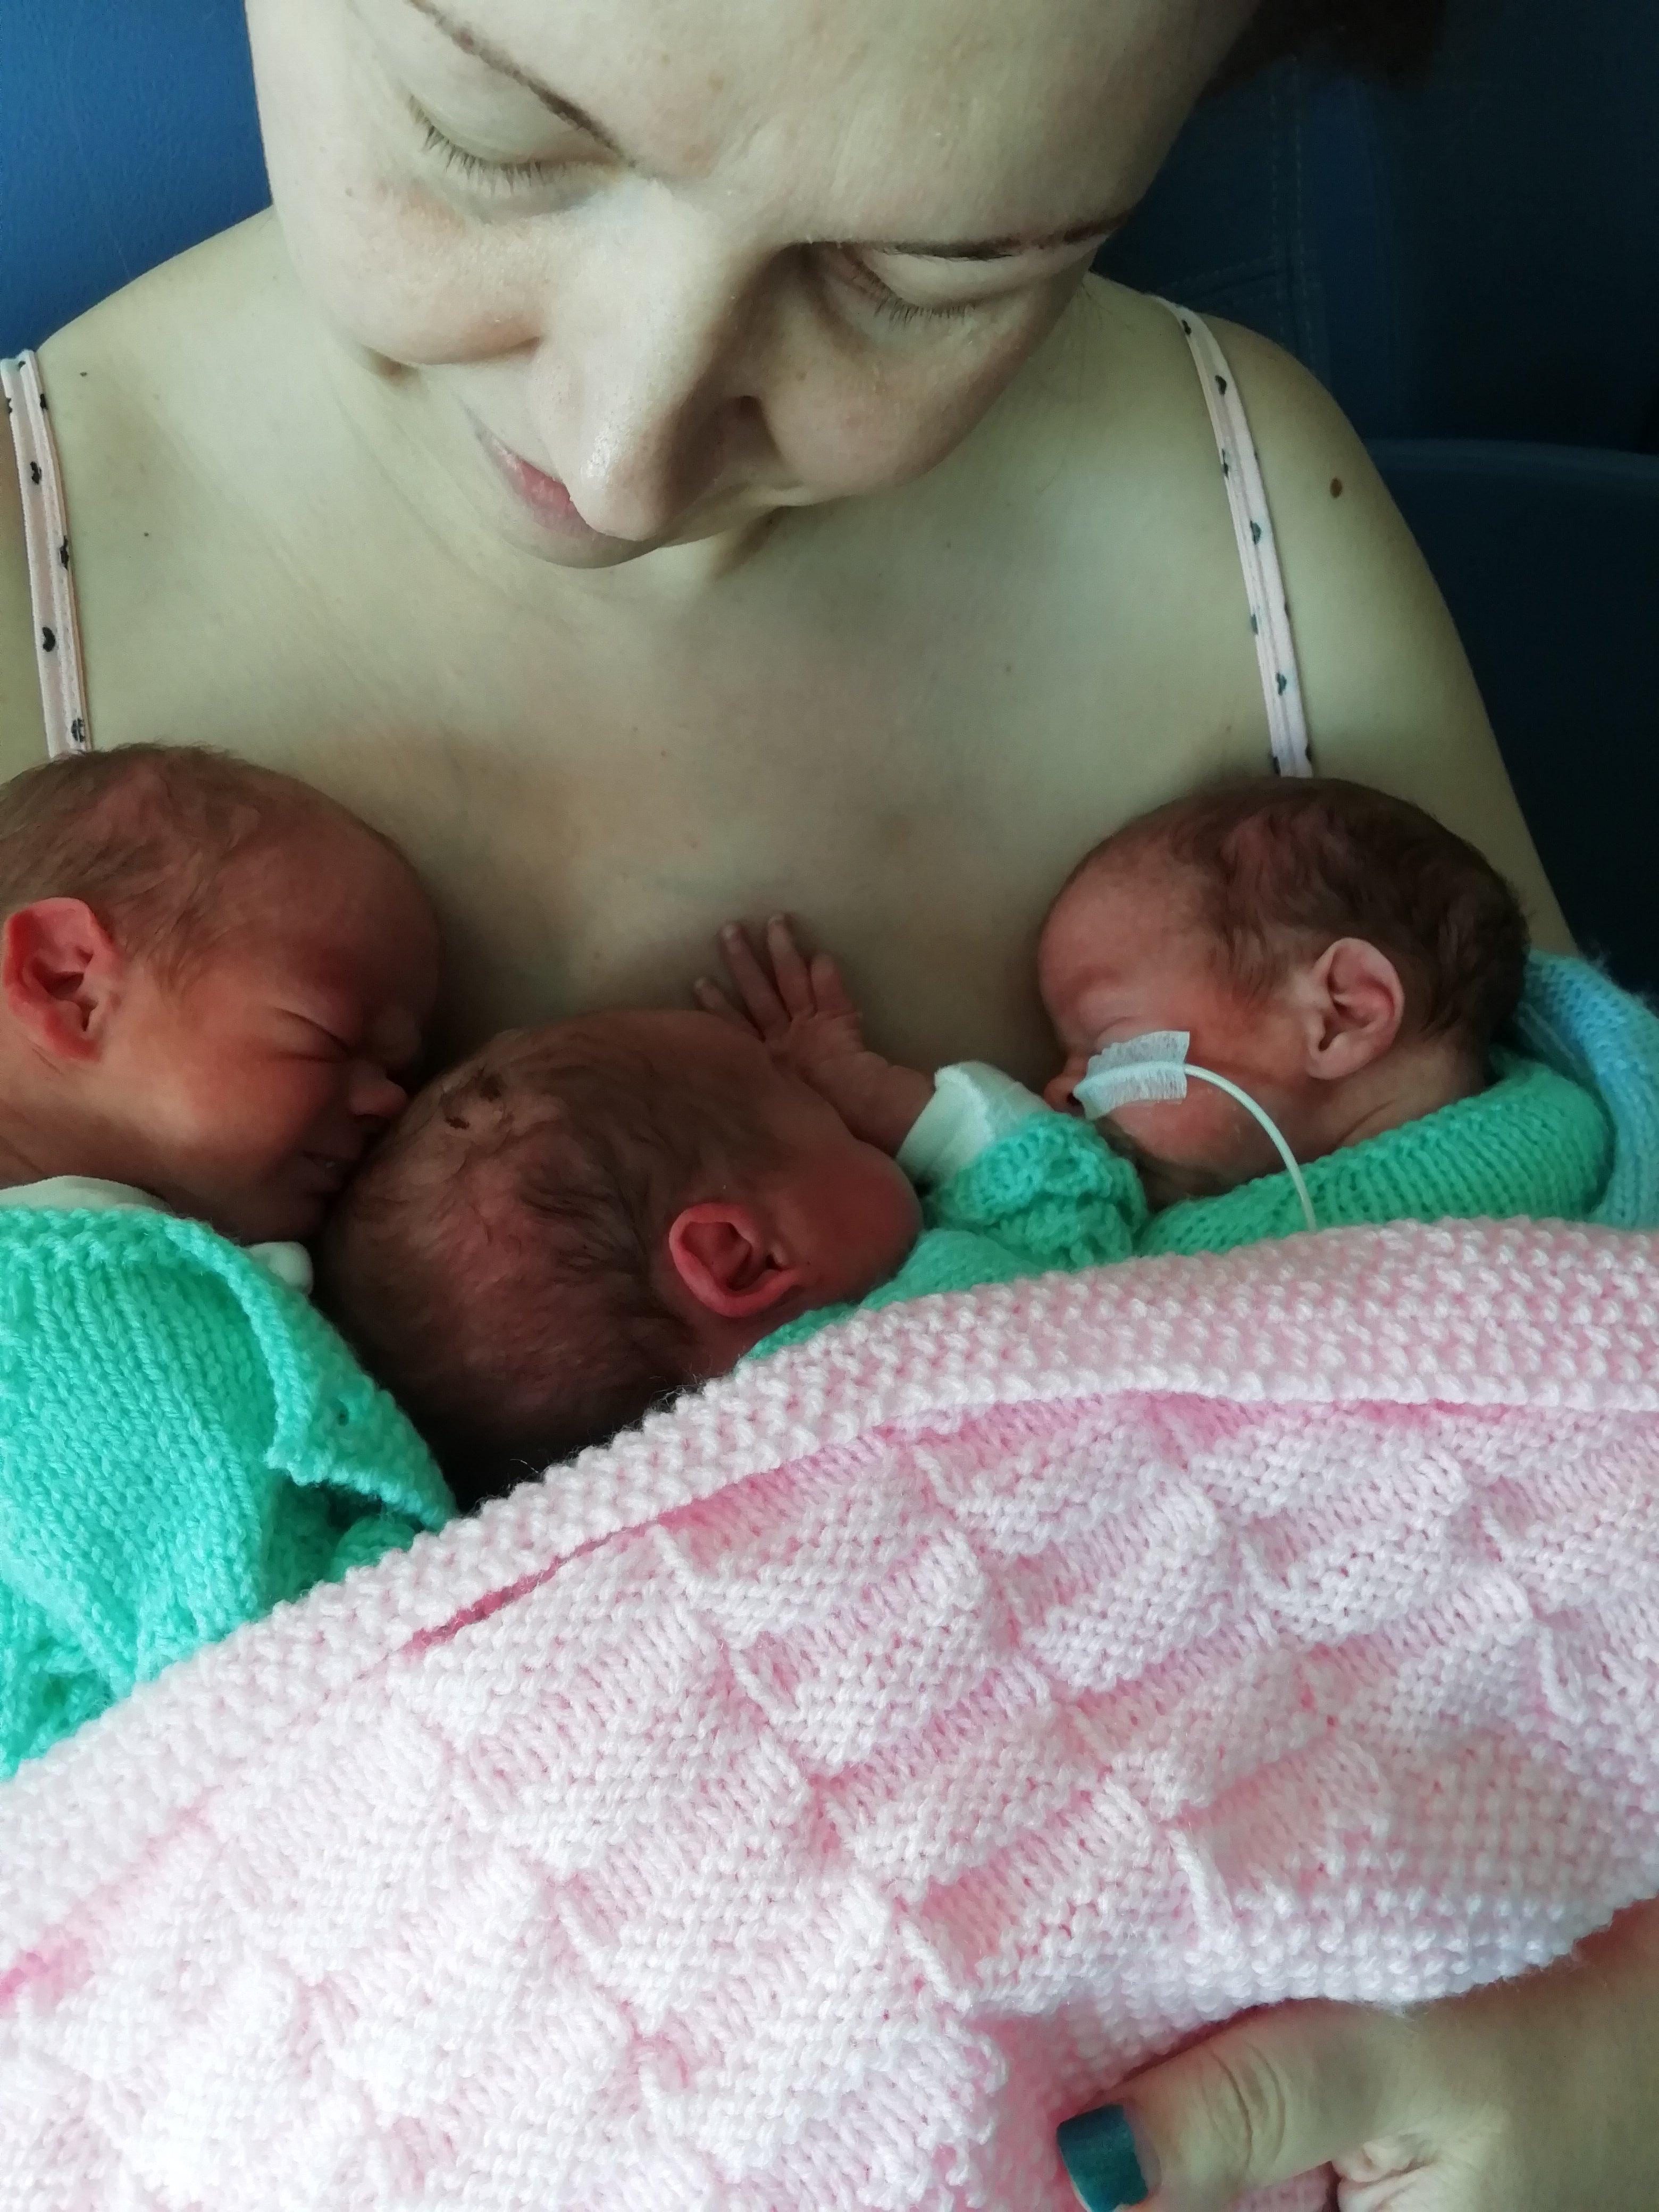 Cheryl Carter and Chris Pegrum from Yapton have triplets: Violet, Frank, and William. Cheryl, 34, from Blenheim Road, Yapton, with her triplets